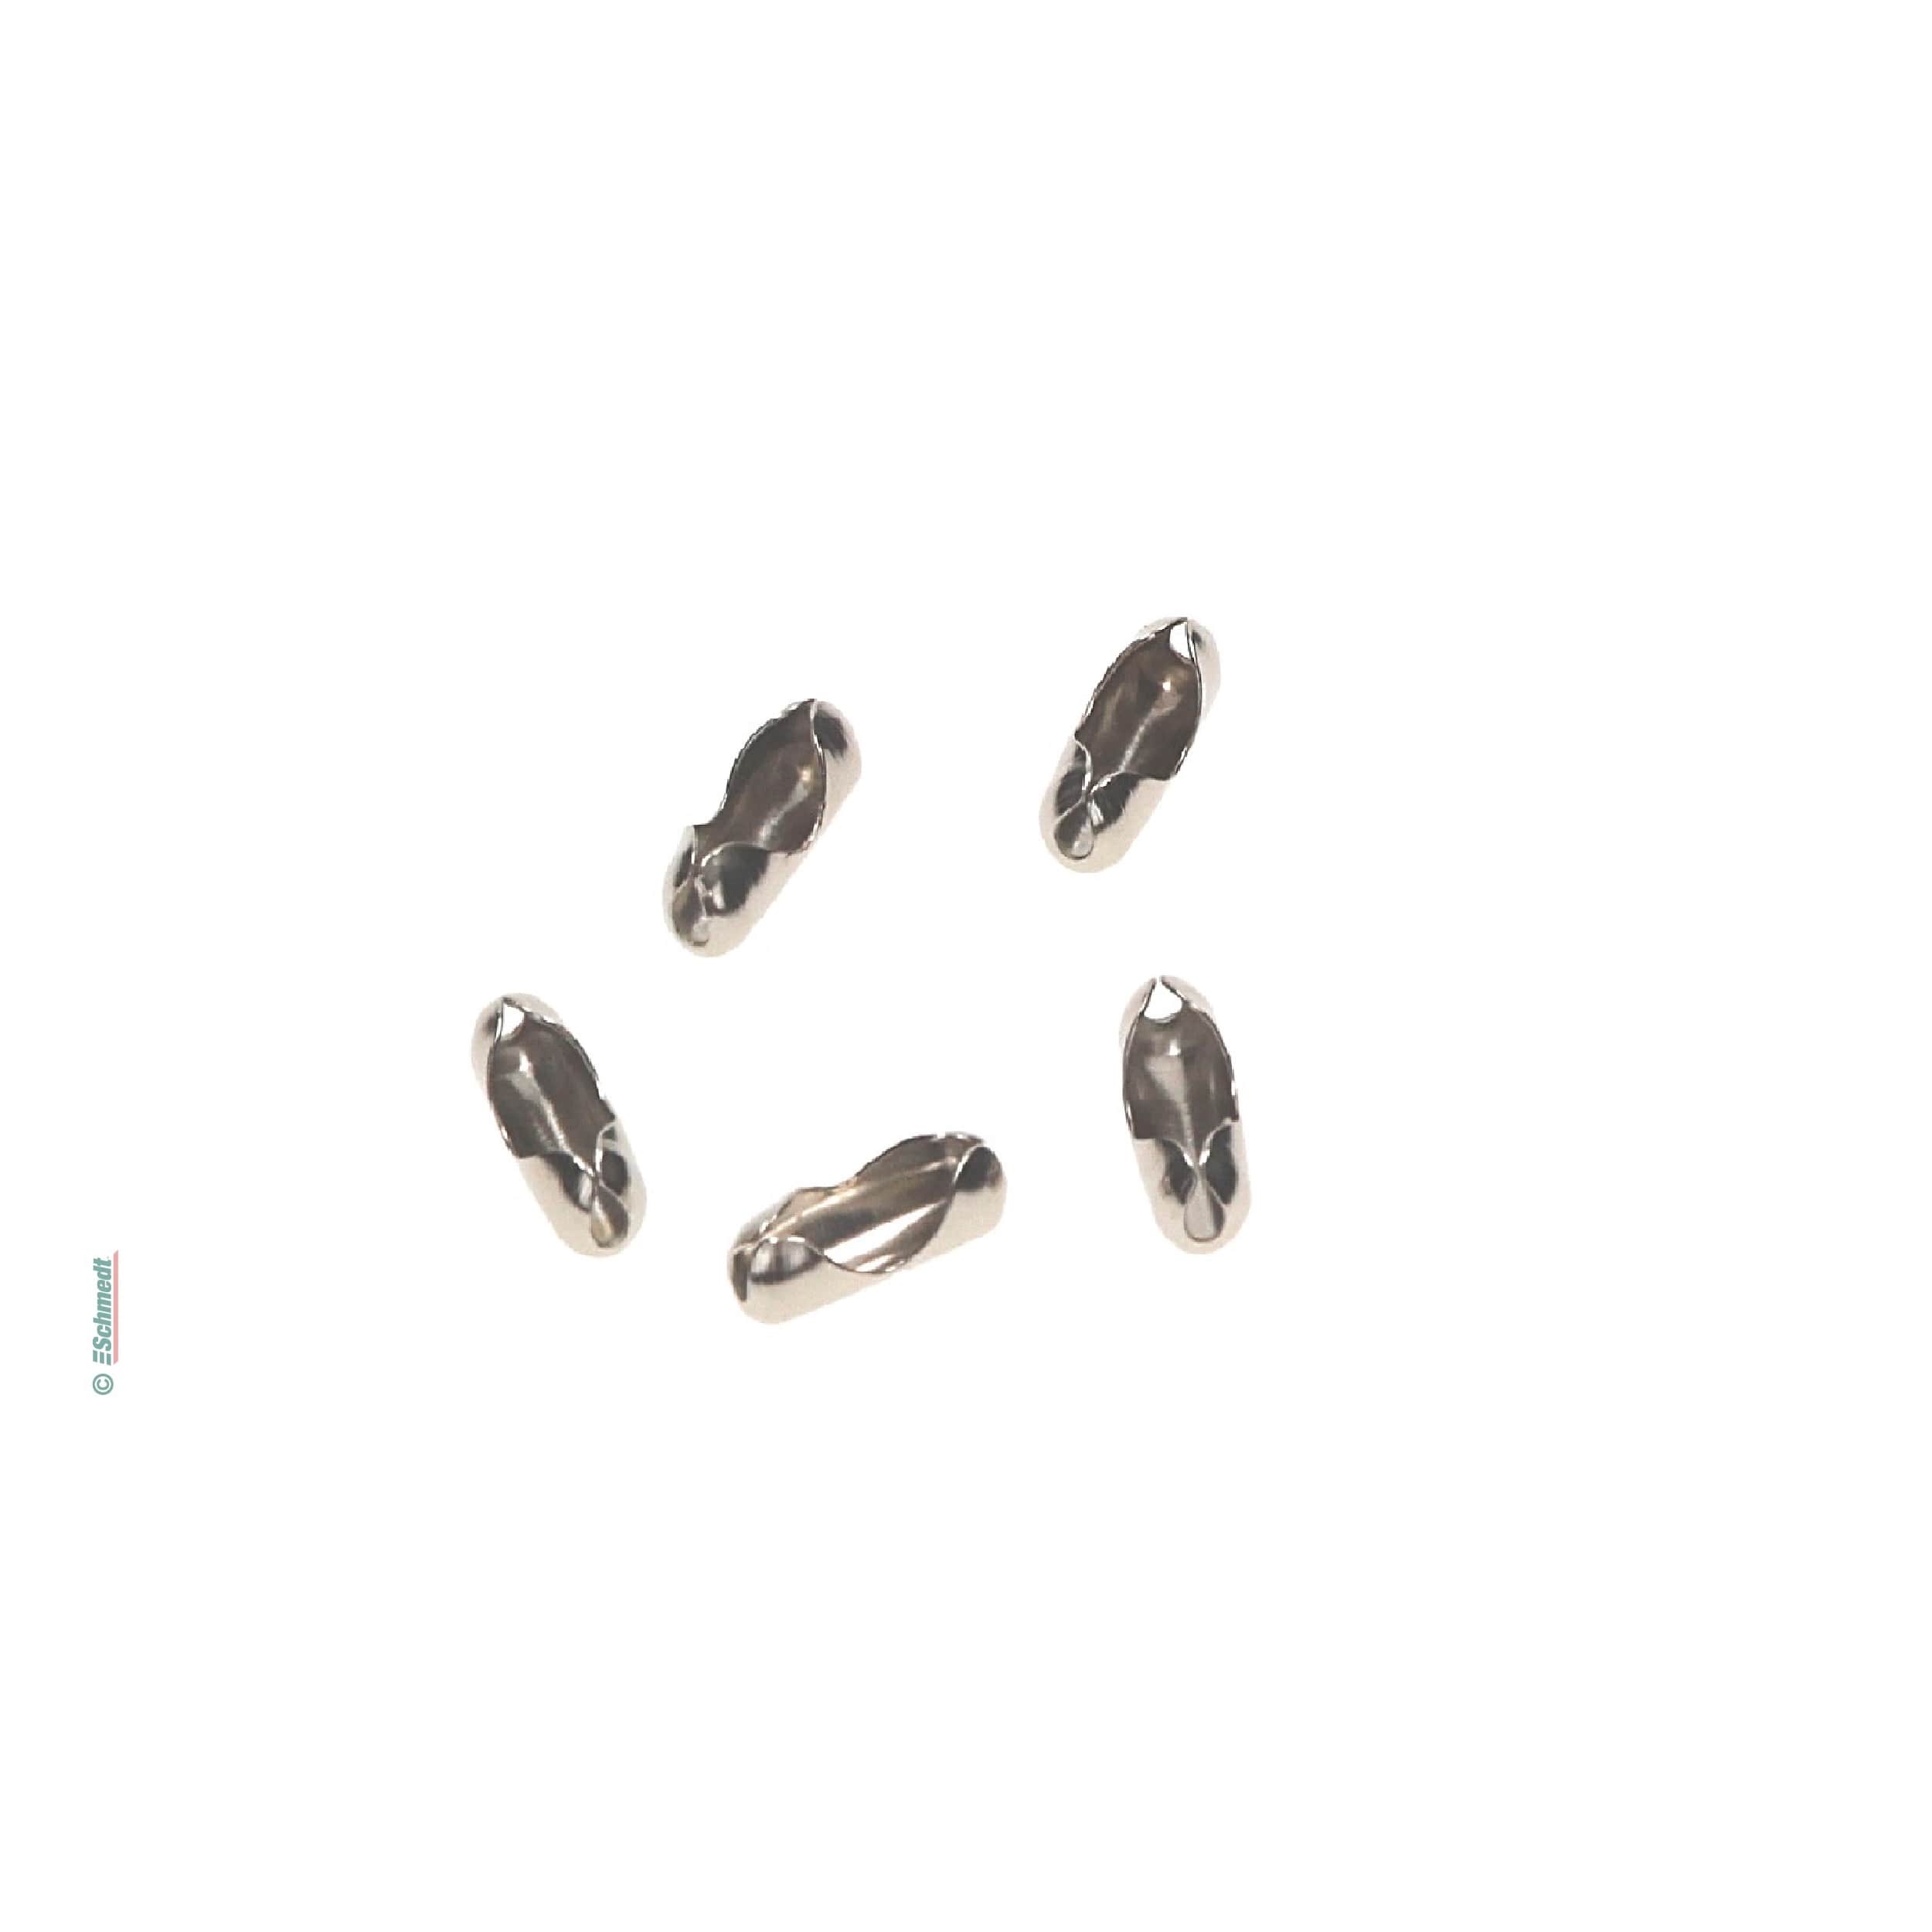 Catch (connector) - 3.2 mm thick - for ball chains - Catch for closing ball chain 5491-3.2....